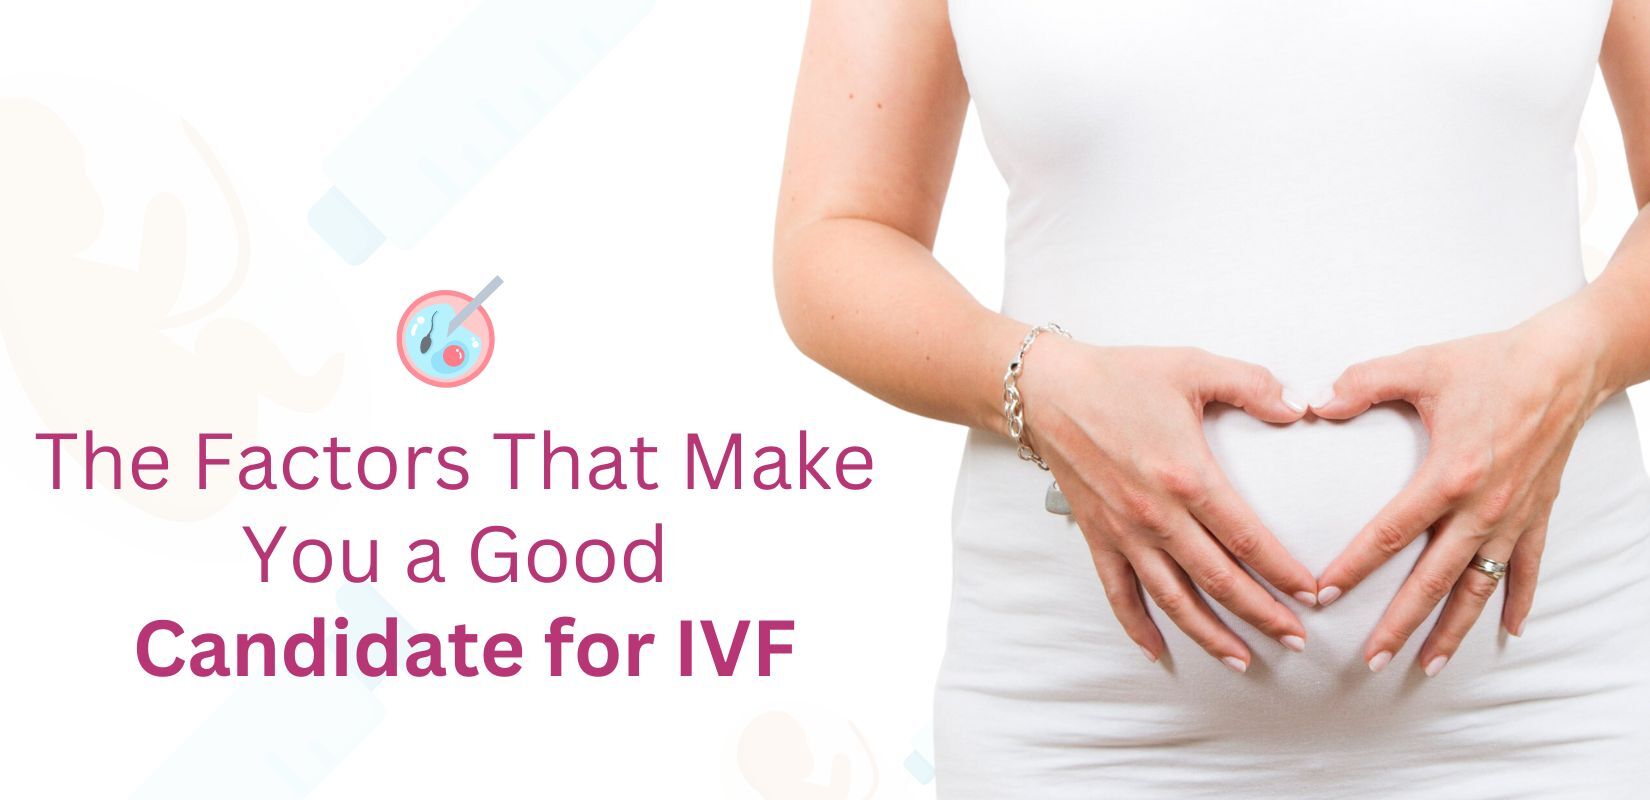 The Factors That Make You a Good Candidate for IVF